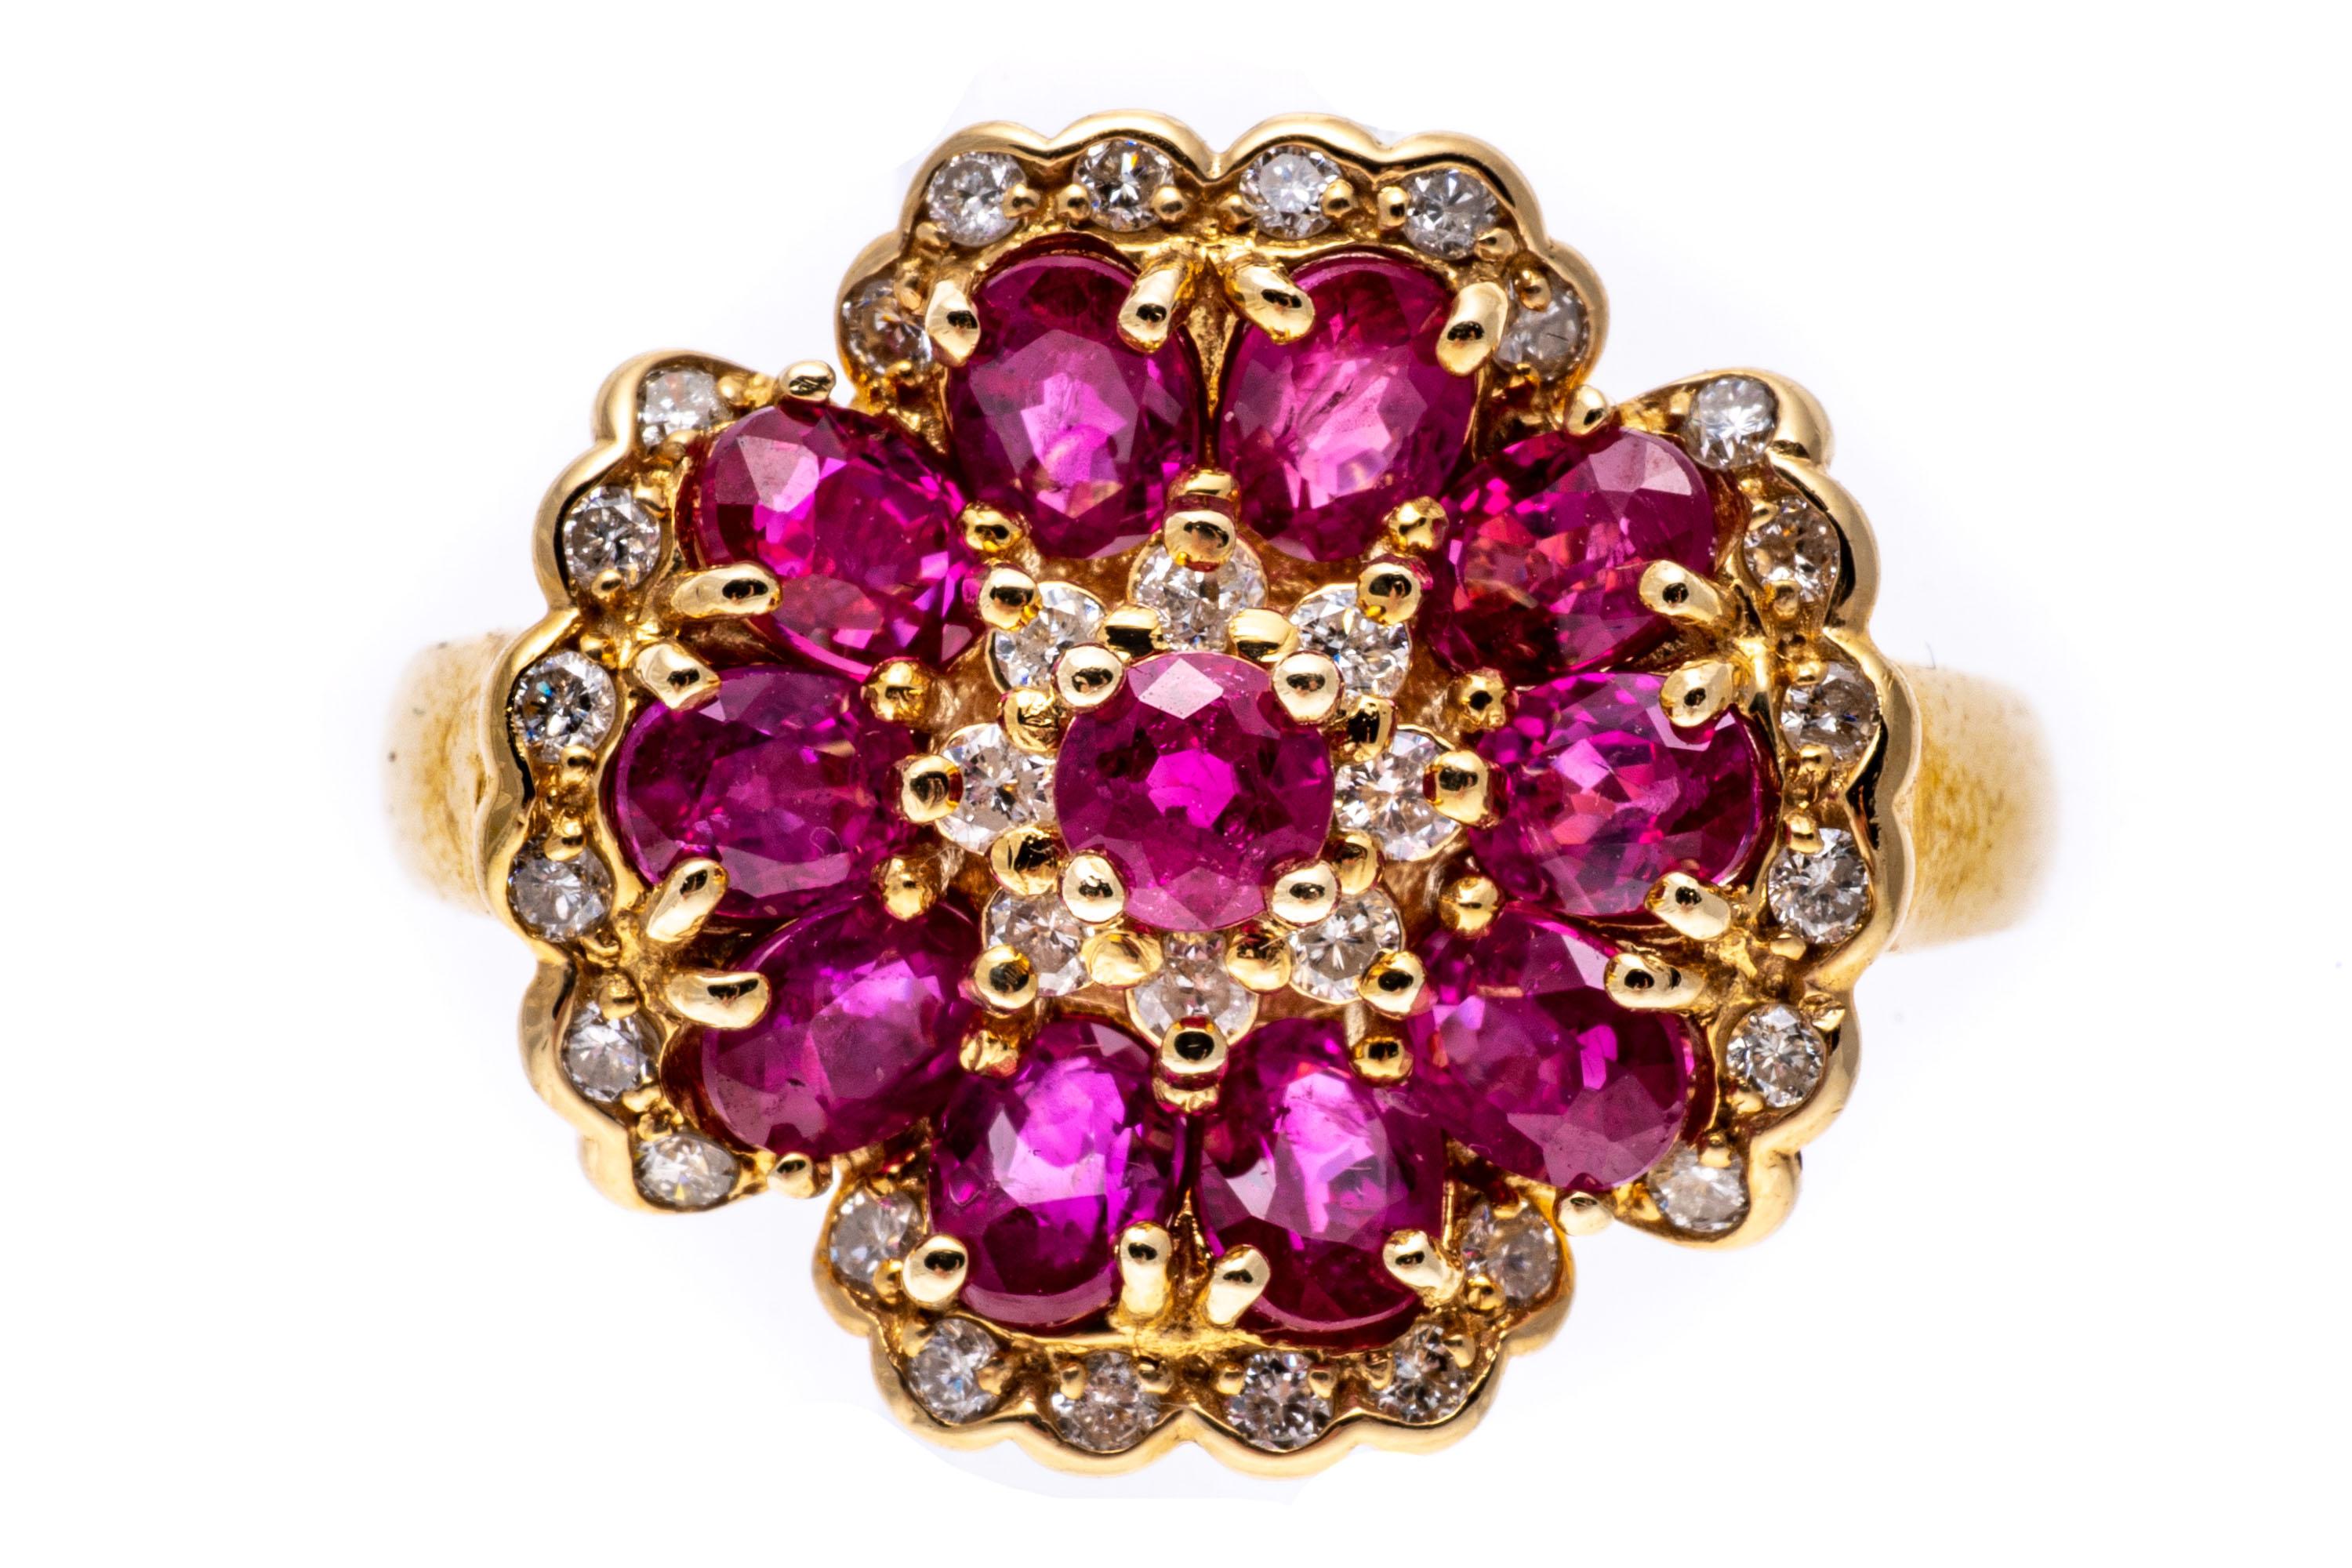 14k Yellow Gold Oval Ruby Flower Motif Ring With Diamond Trim For Sale 1